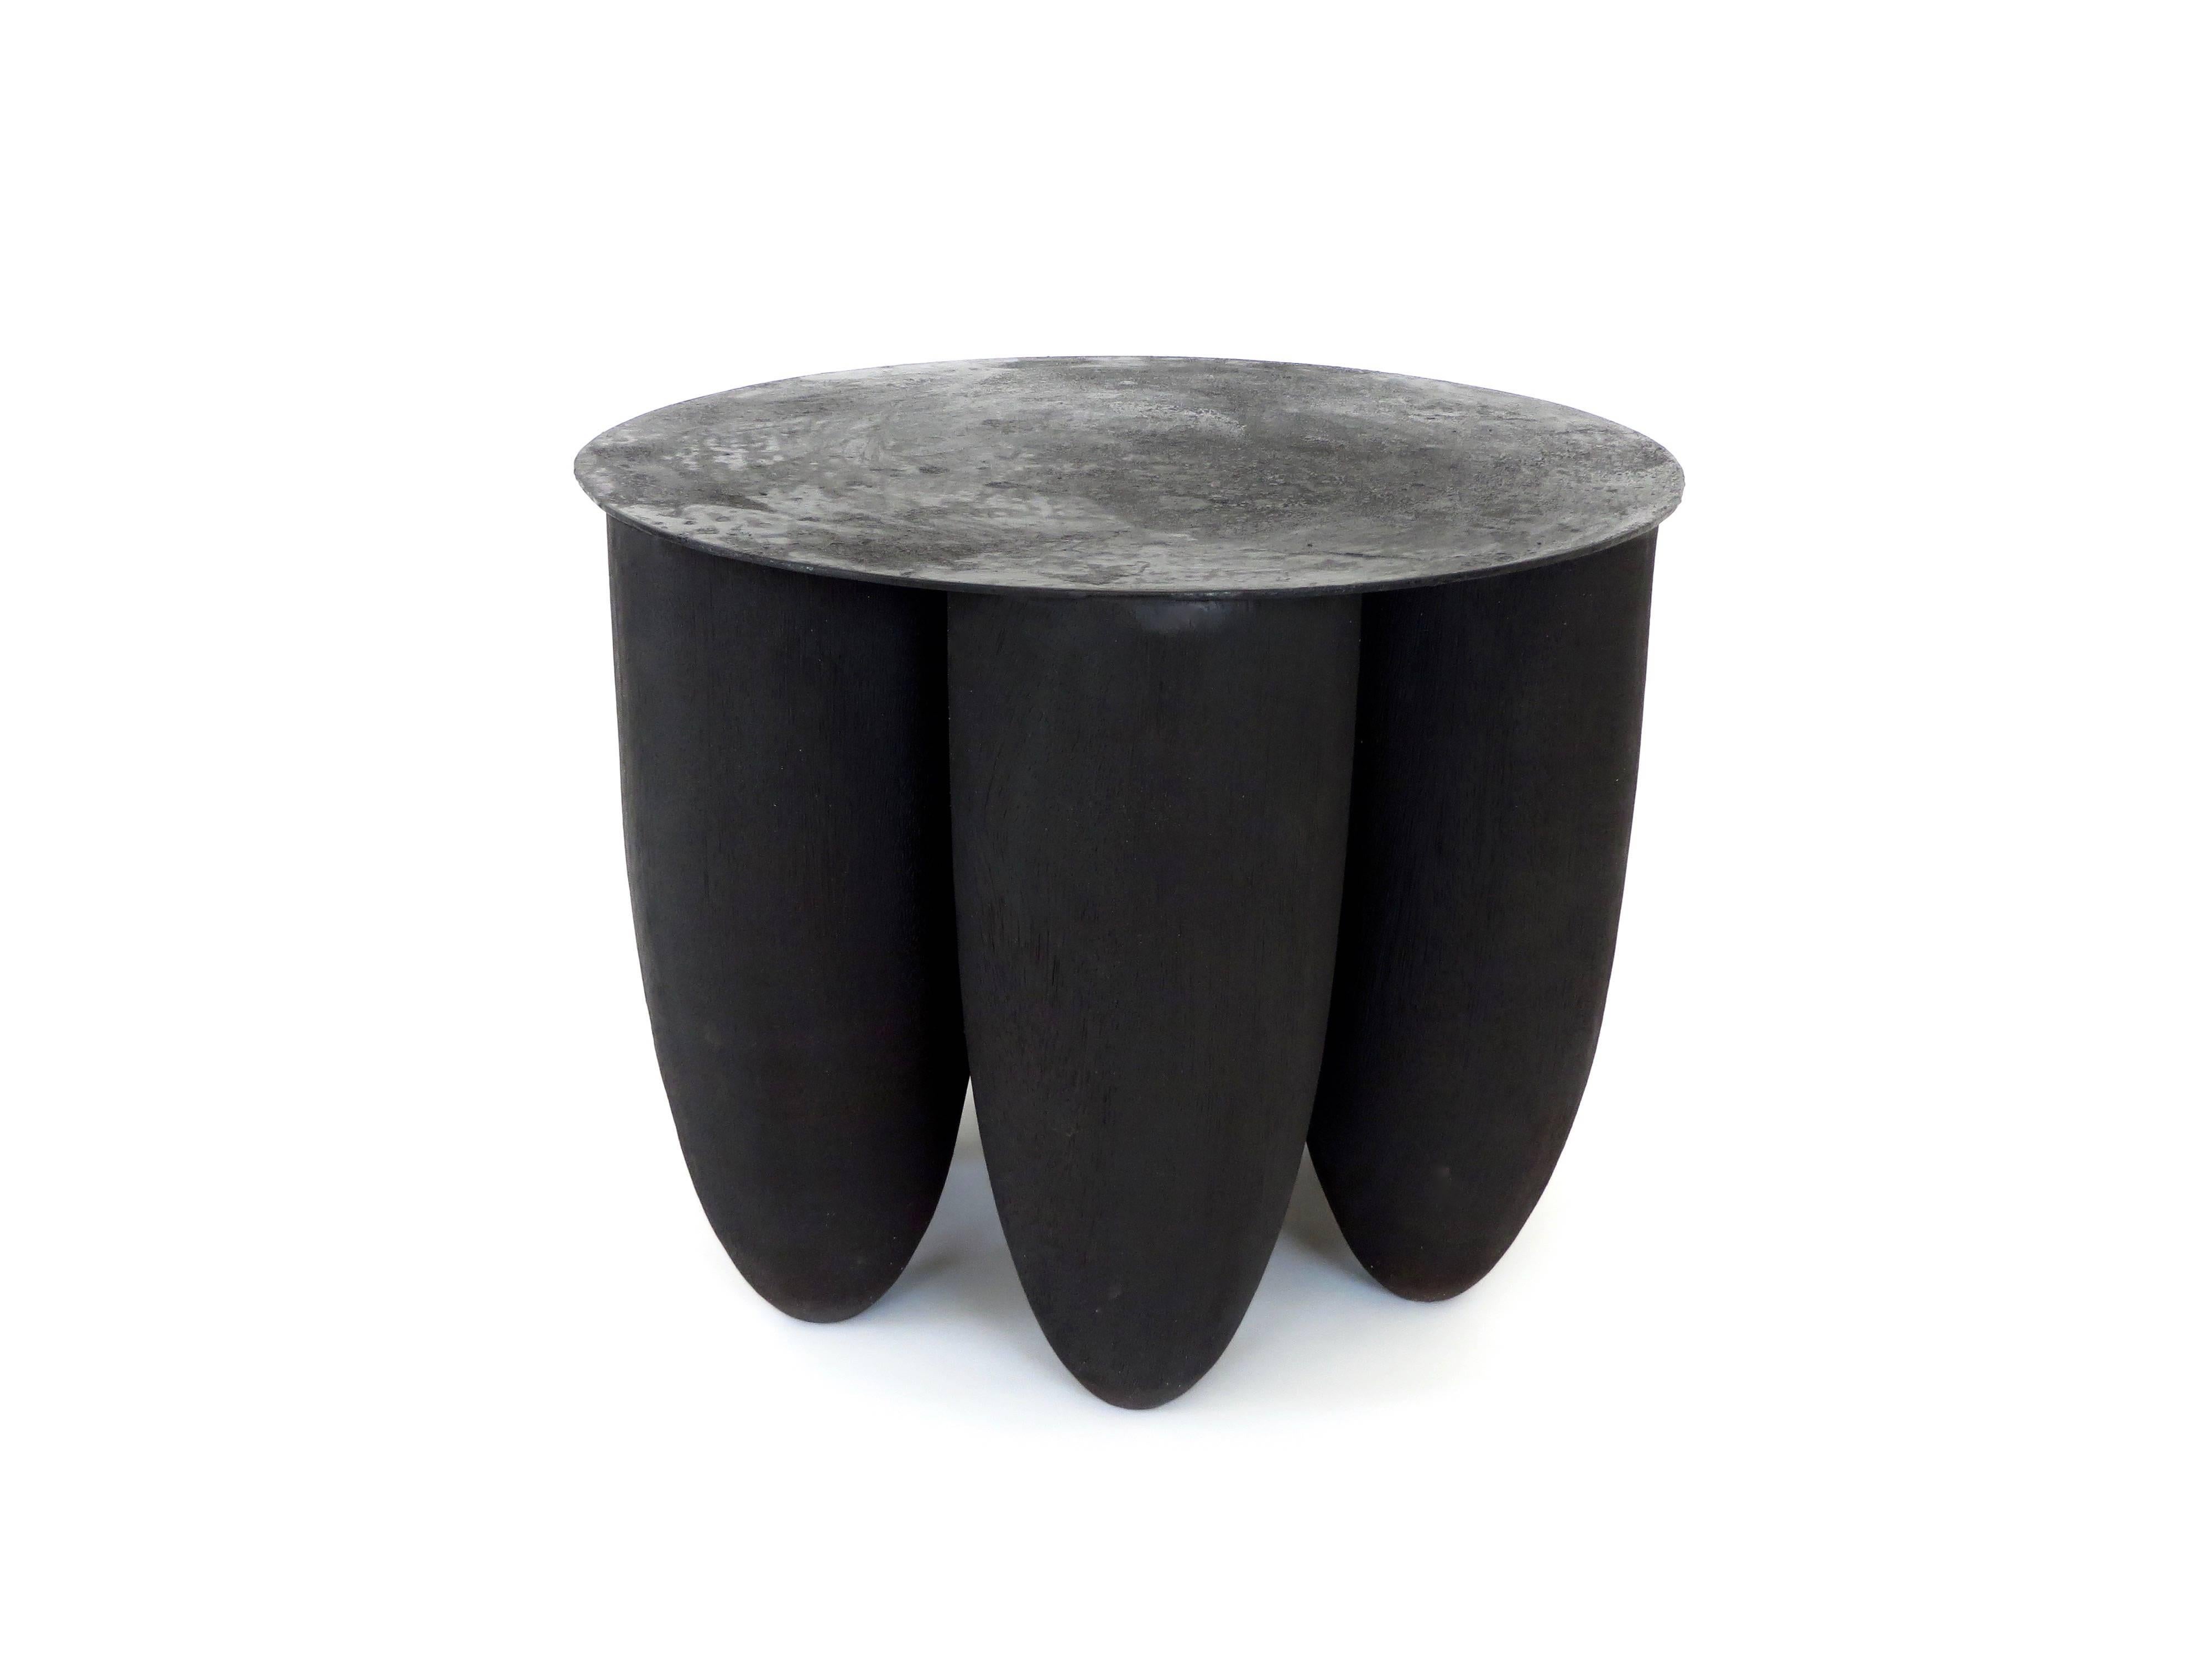 Black Iroko wood and burned steel small seven leg signed coffee table, side table or stool by Belgian designer Arno Declercq.
A Belgian designer and art dealer who makes bespoke objects for interiors with passion for design, atmosphere, history and